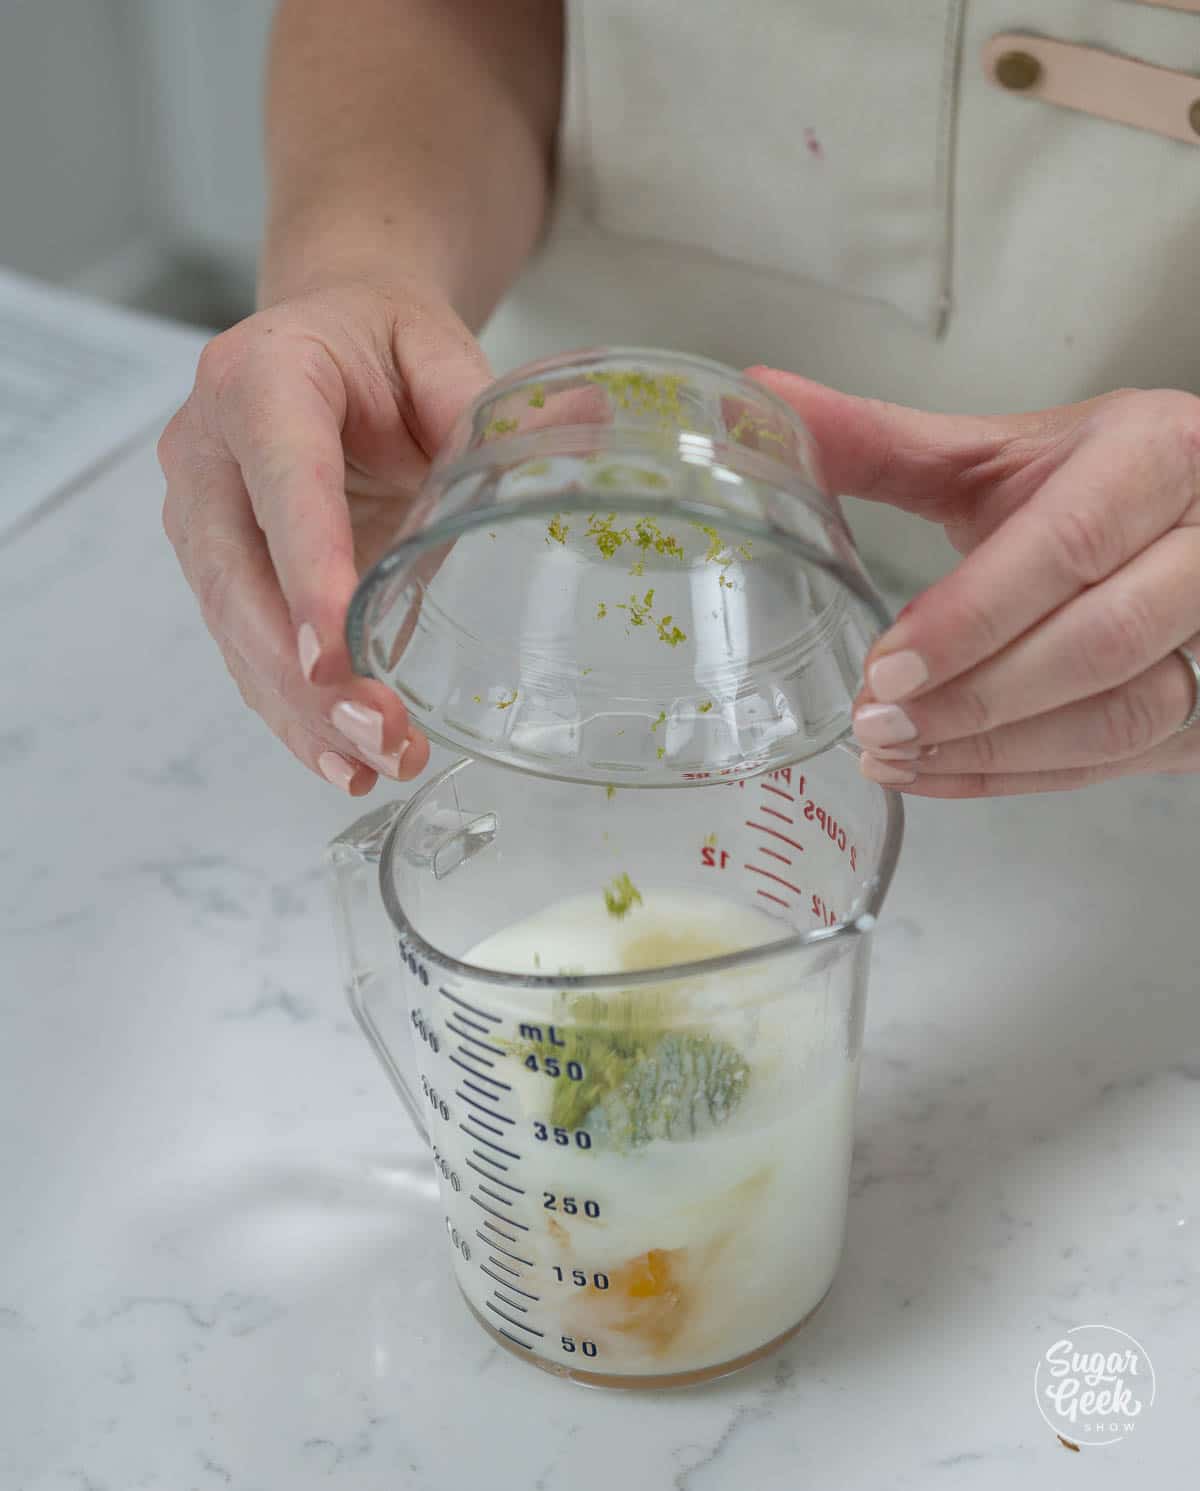 adding lime zest to buttermilk and eggs in a measuring cup